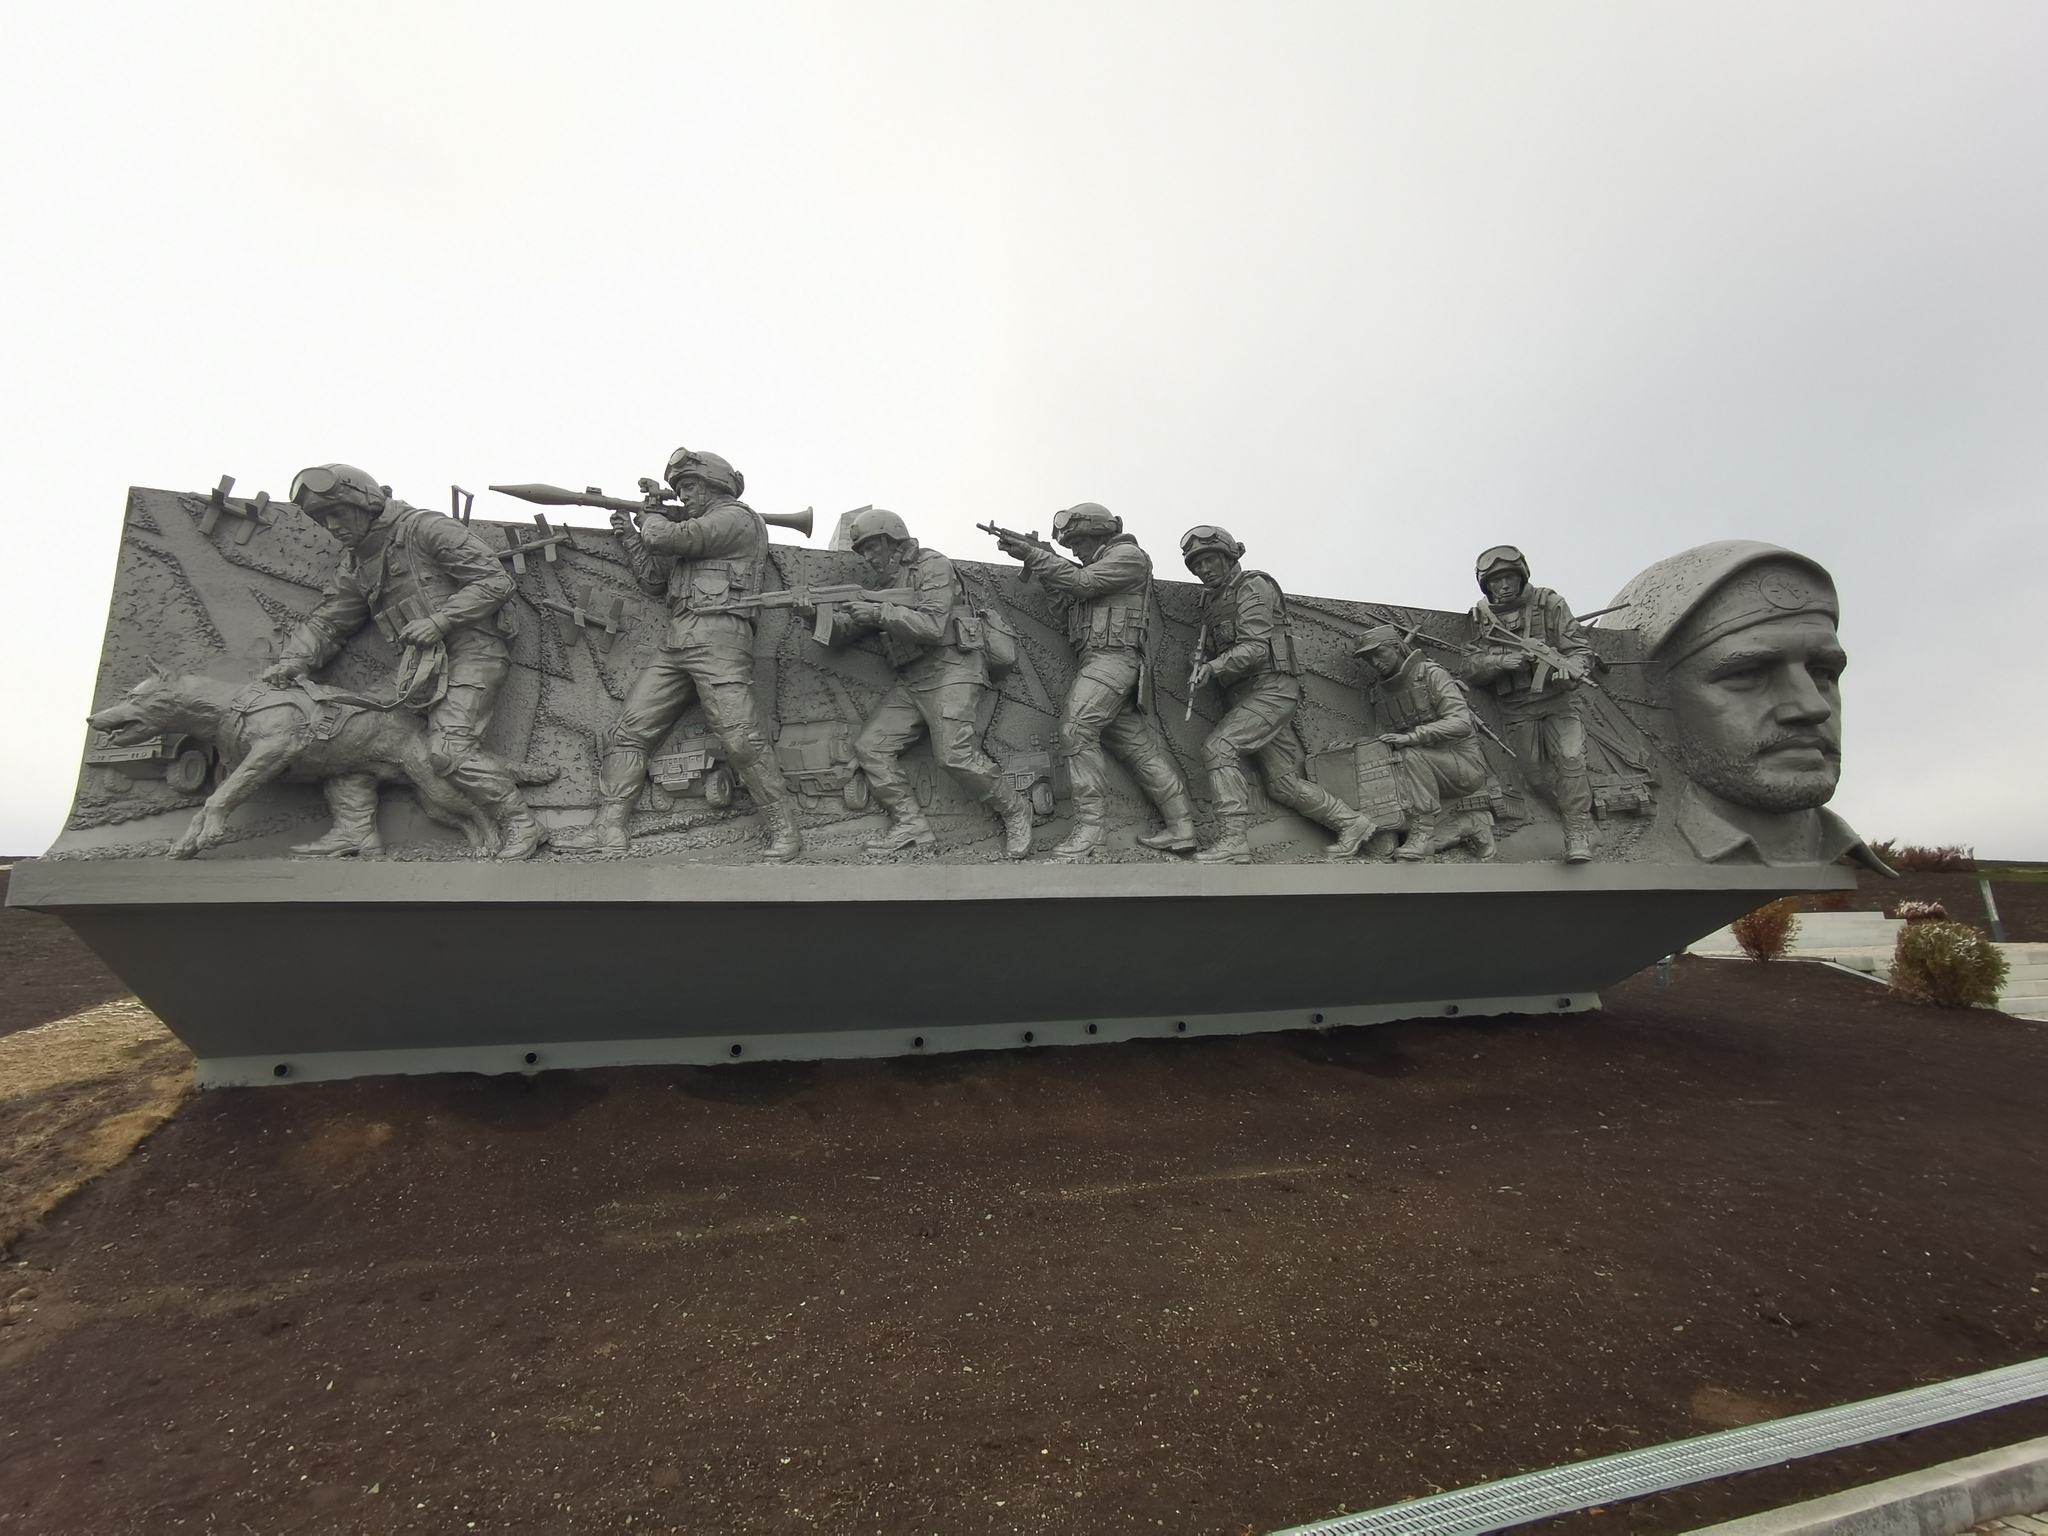 Response to the post Rzhev Memorial to a Soviet Soldier - Travel across Russia, Rzhev Memorial, The Great Patriotic War, Rzhev, Numbers, Monument, The photo, Mobile photography, Saur-Mogila, Reply to post, Longpost, Memorial, Donbass